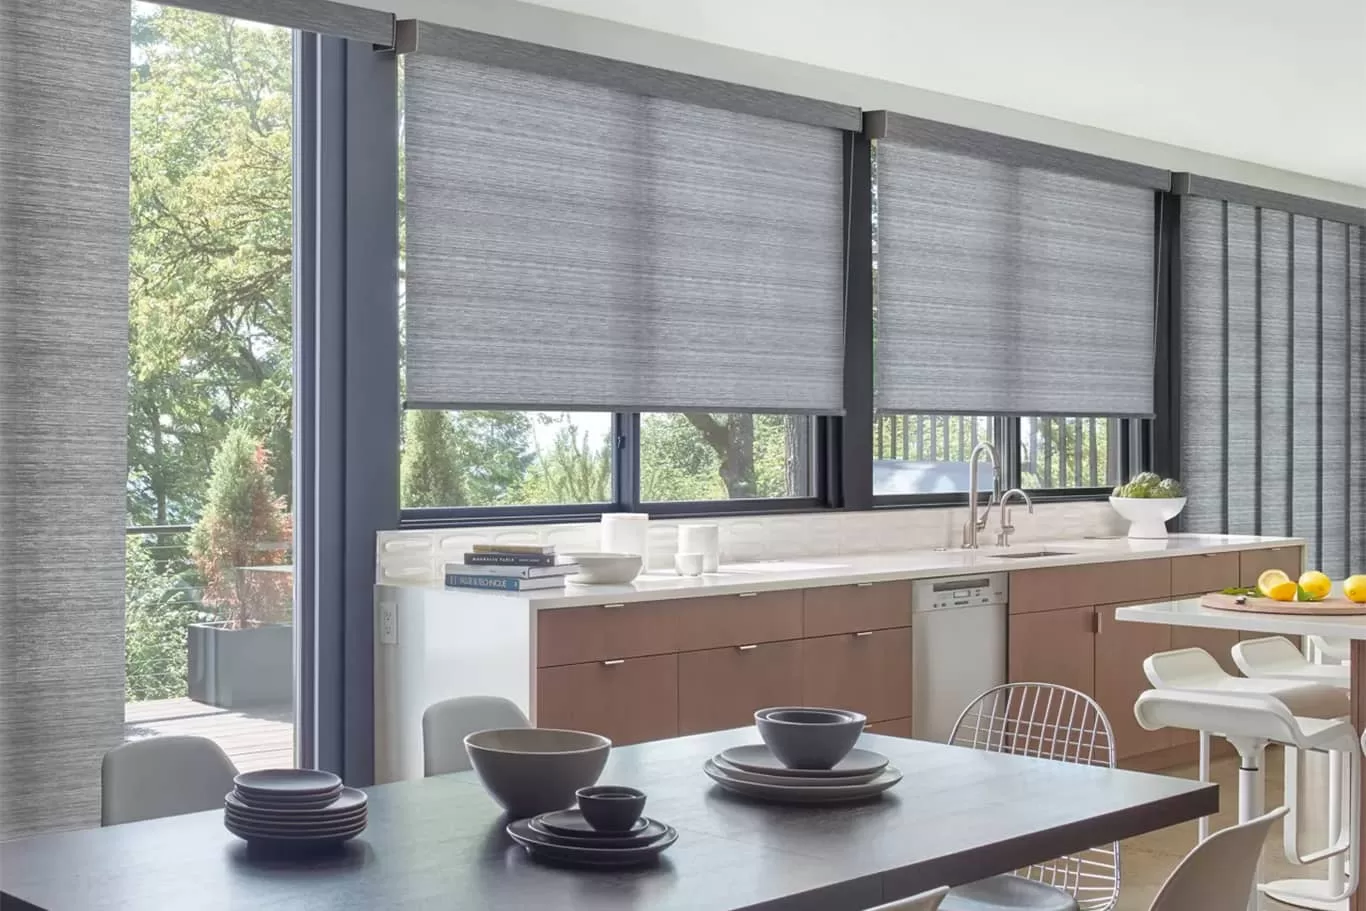 shades on sliding glass door and large windows